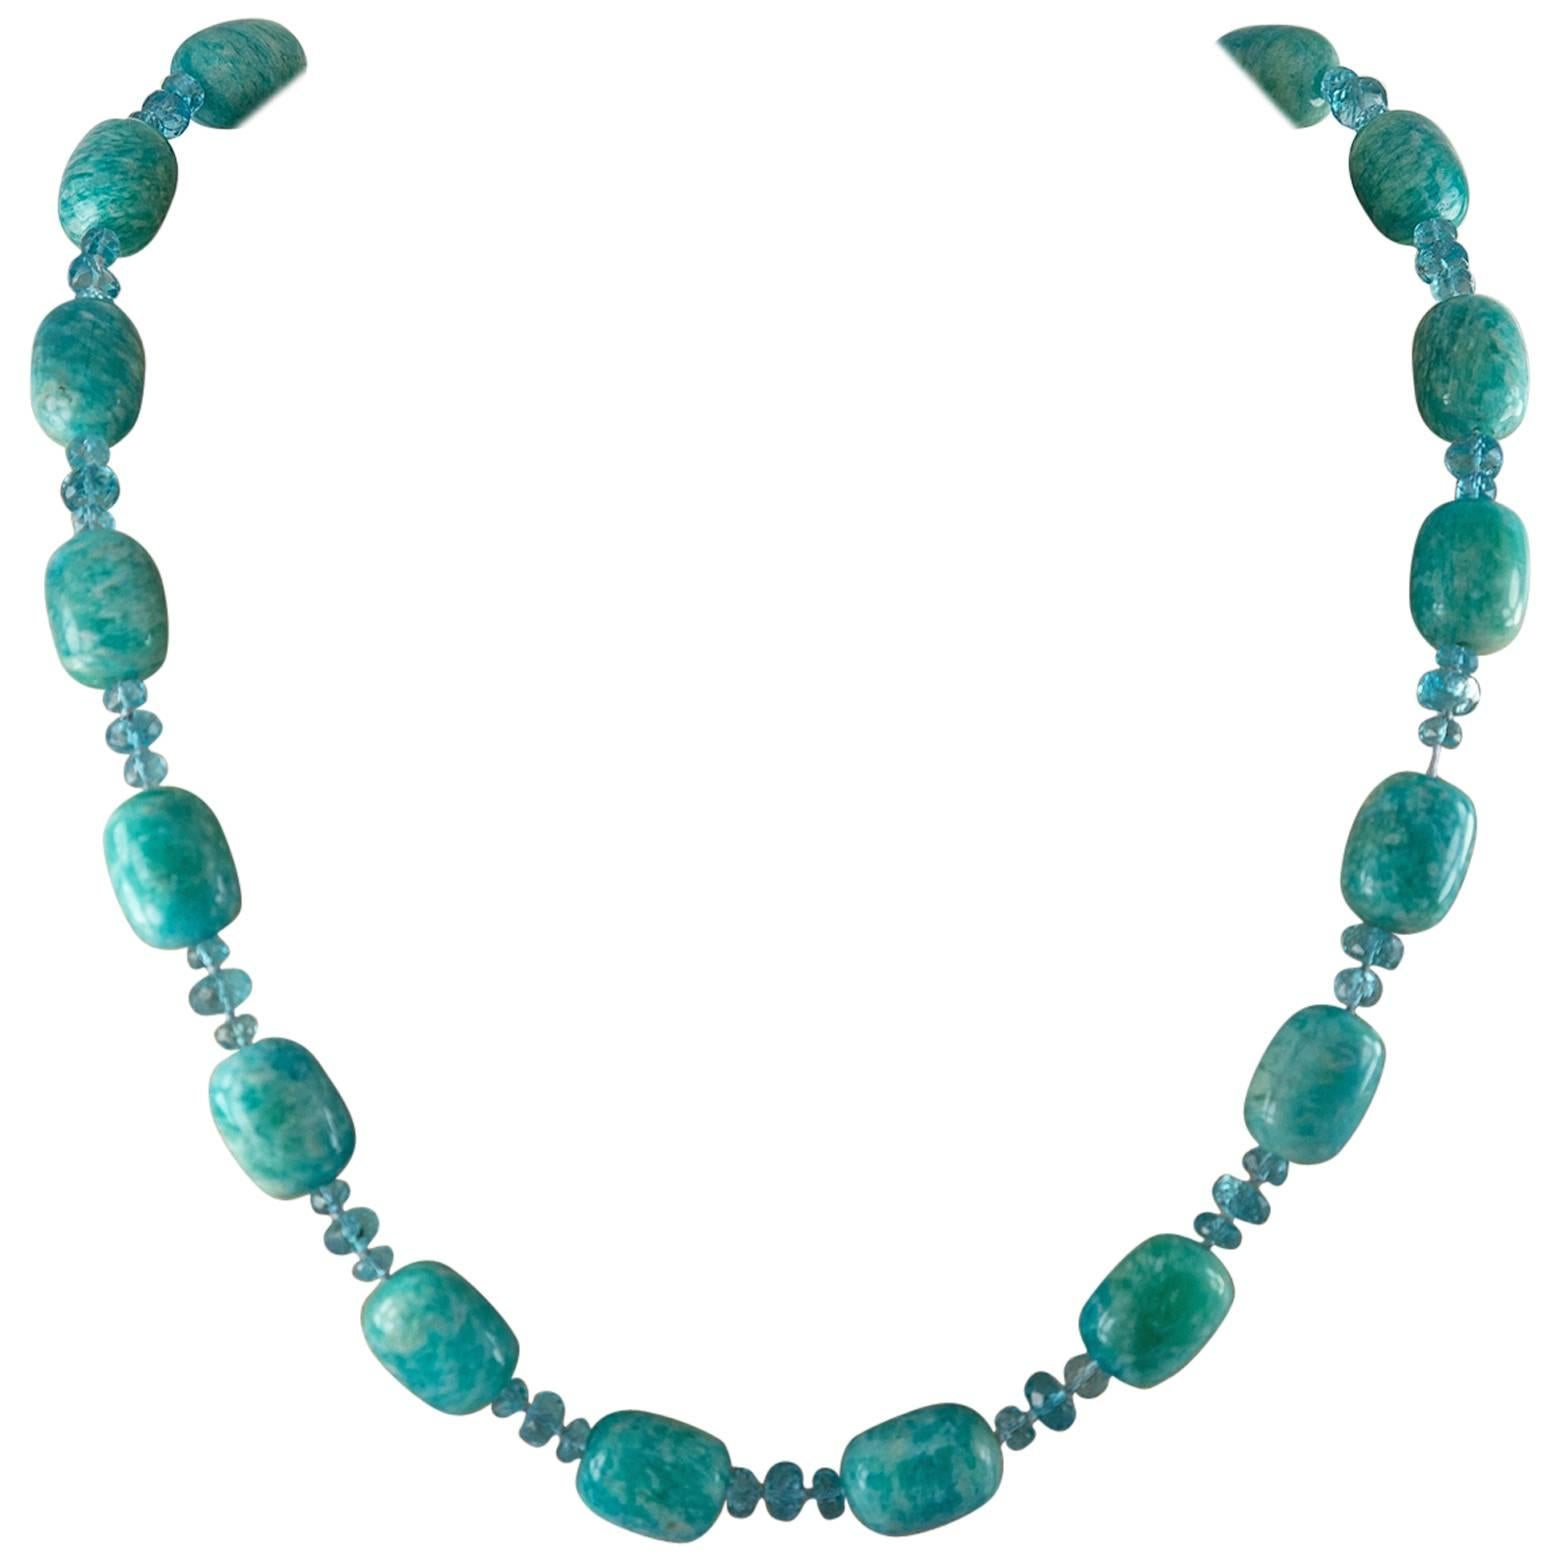 Modern Amazonite and Apatite Bead Necklace 